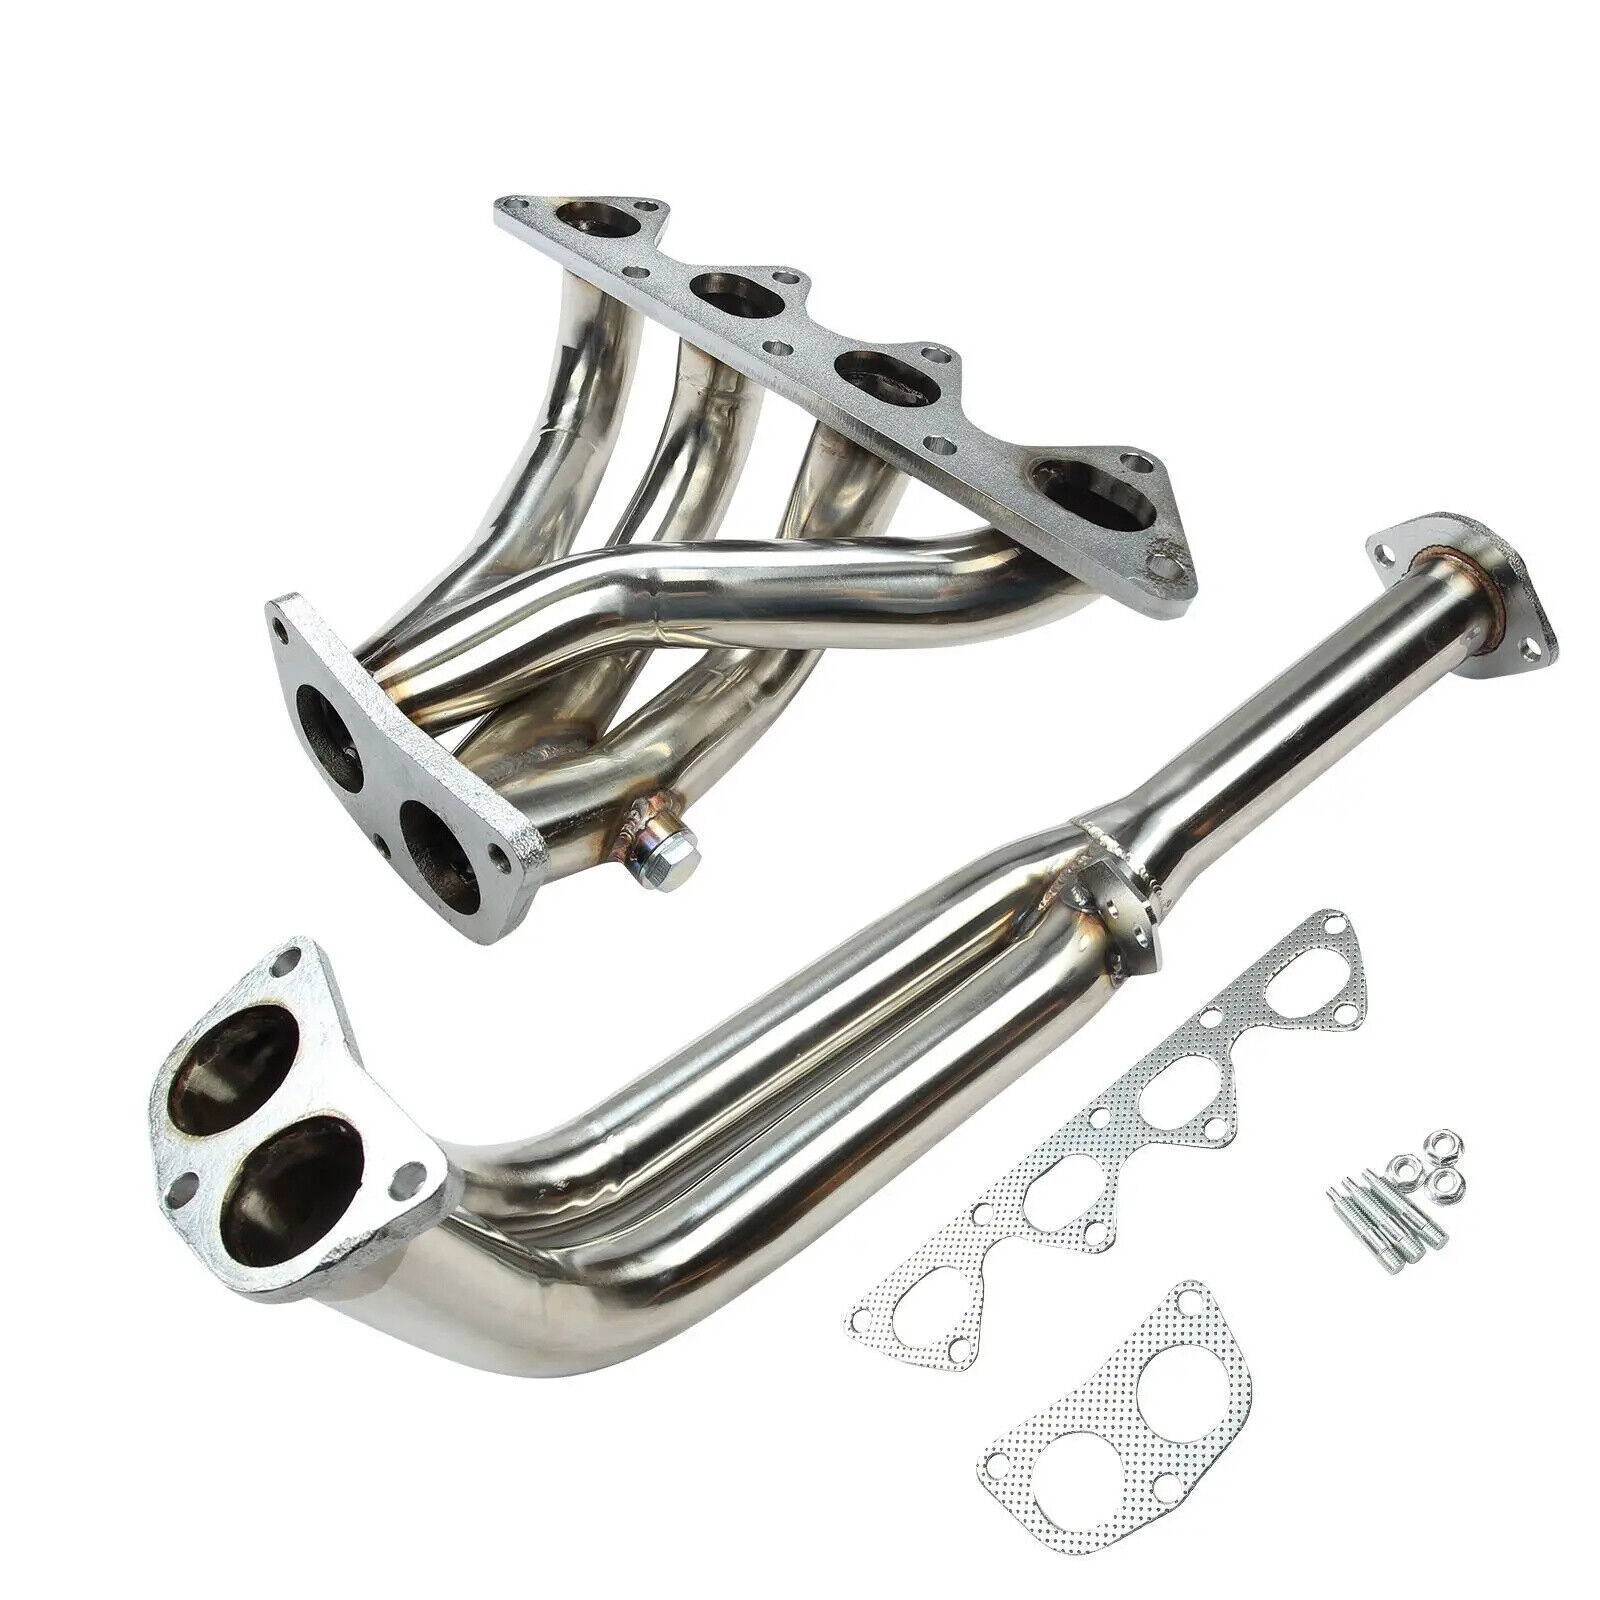 New Racing Headers for 1990-1991 Acura Integra GS / LS / RS